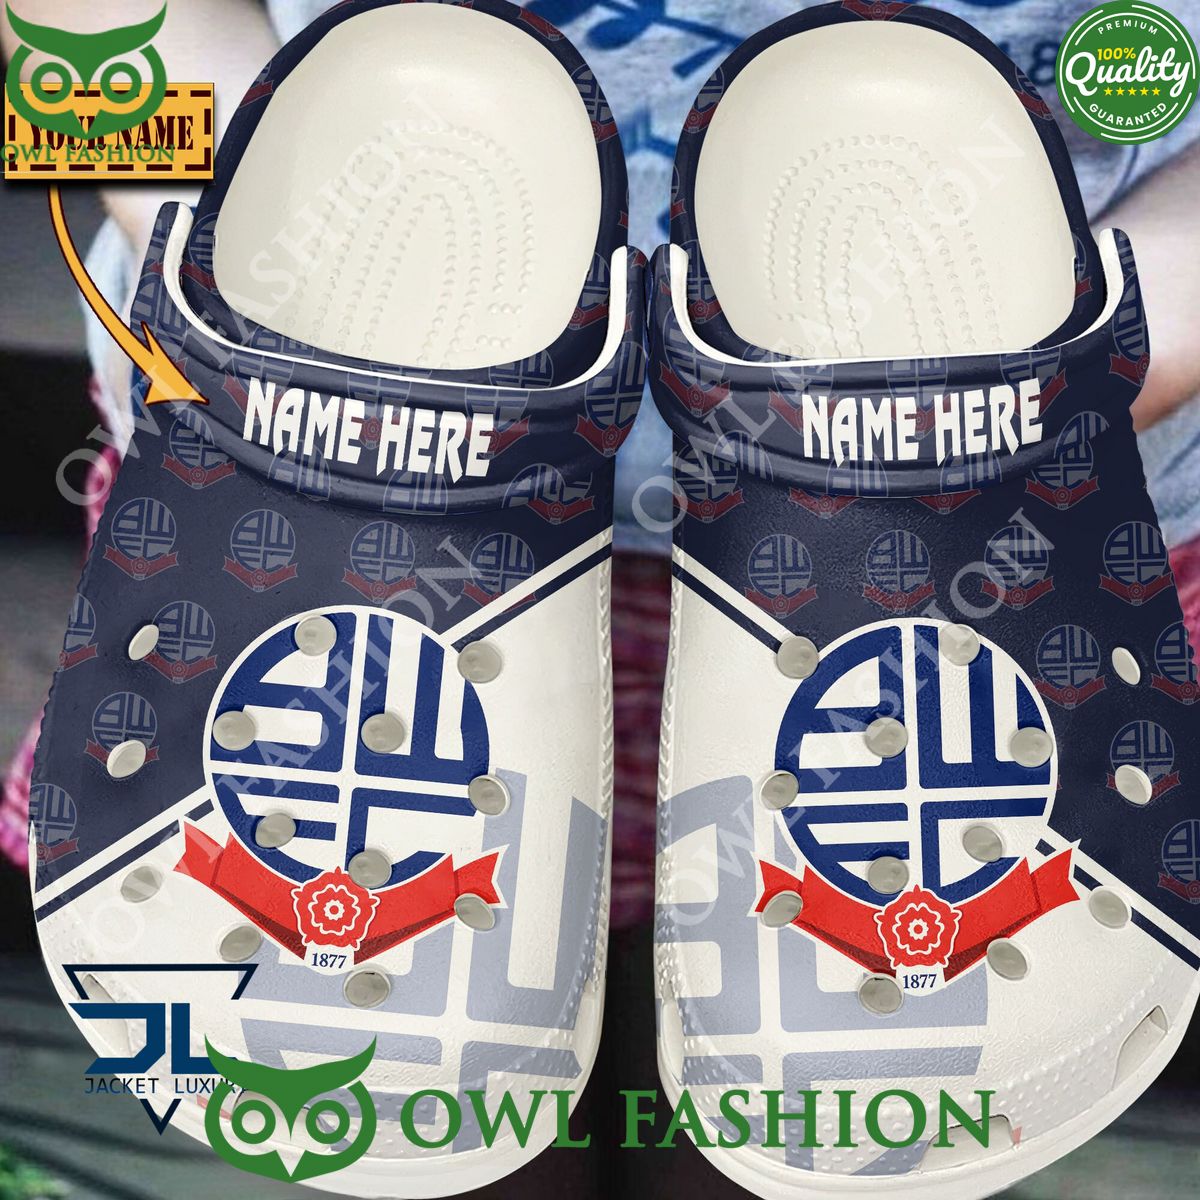 League One Bolton Wanderers FC 1877 Custom Name Croc You are always amazing